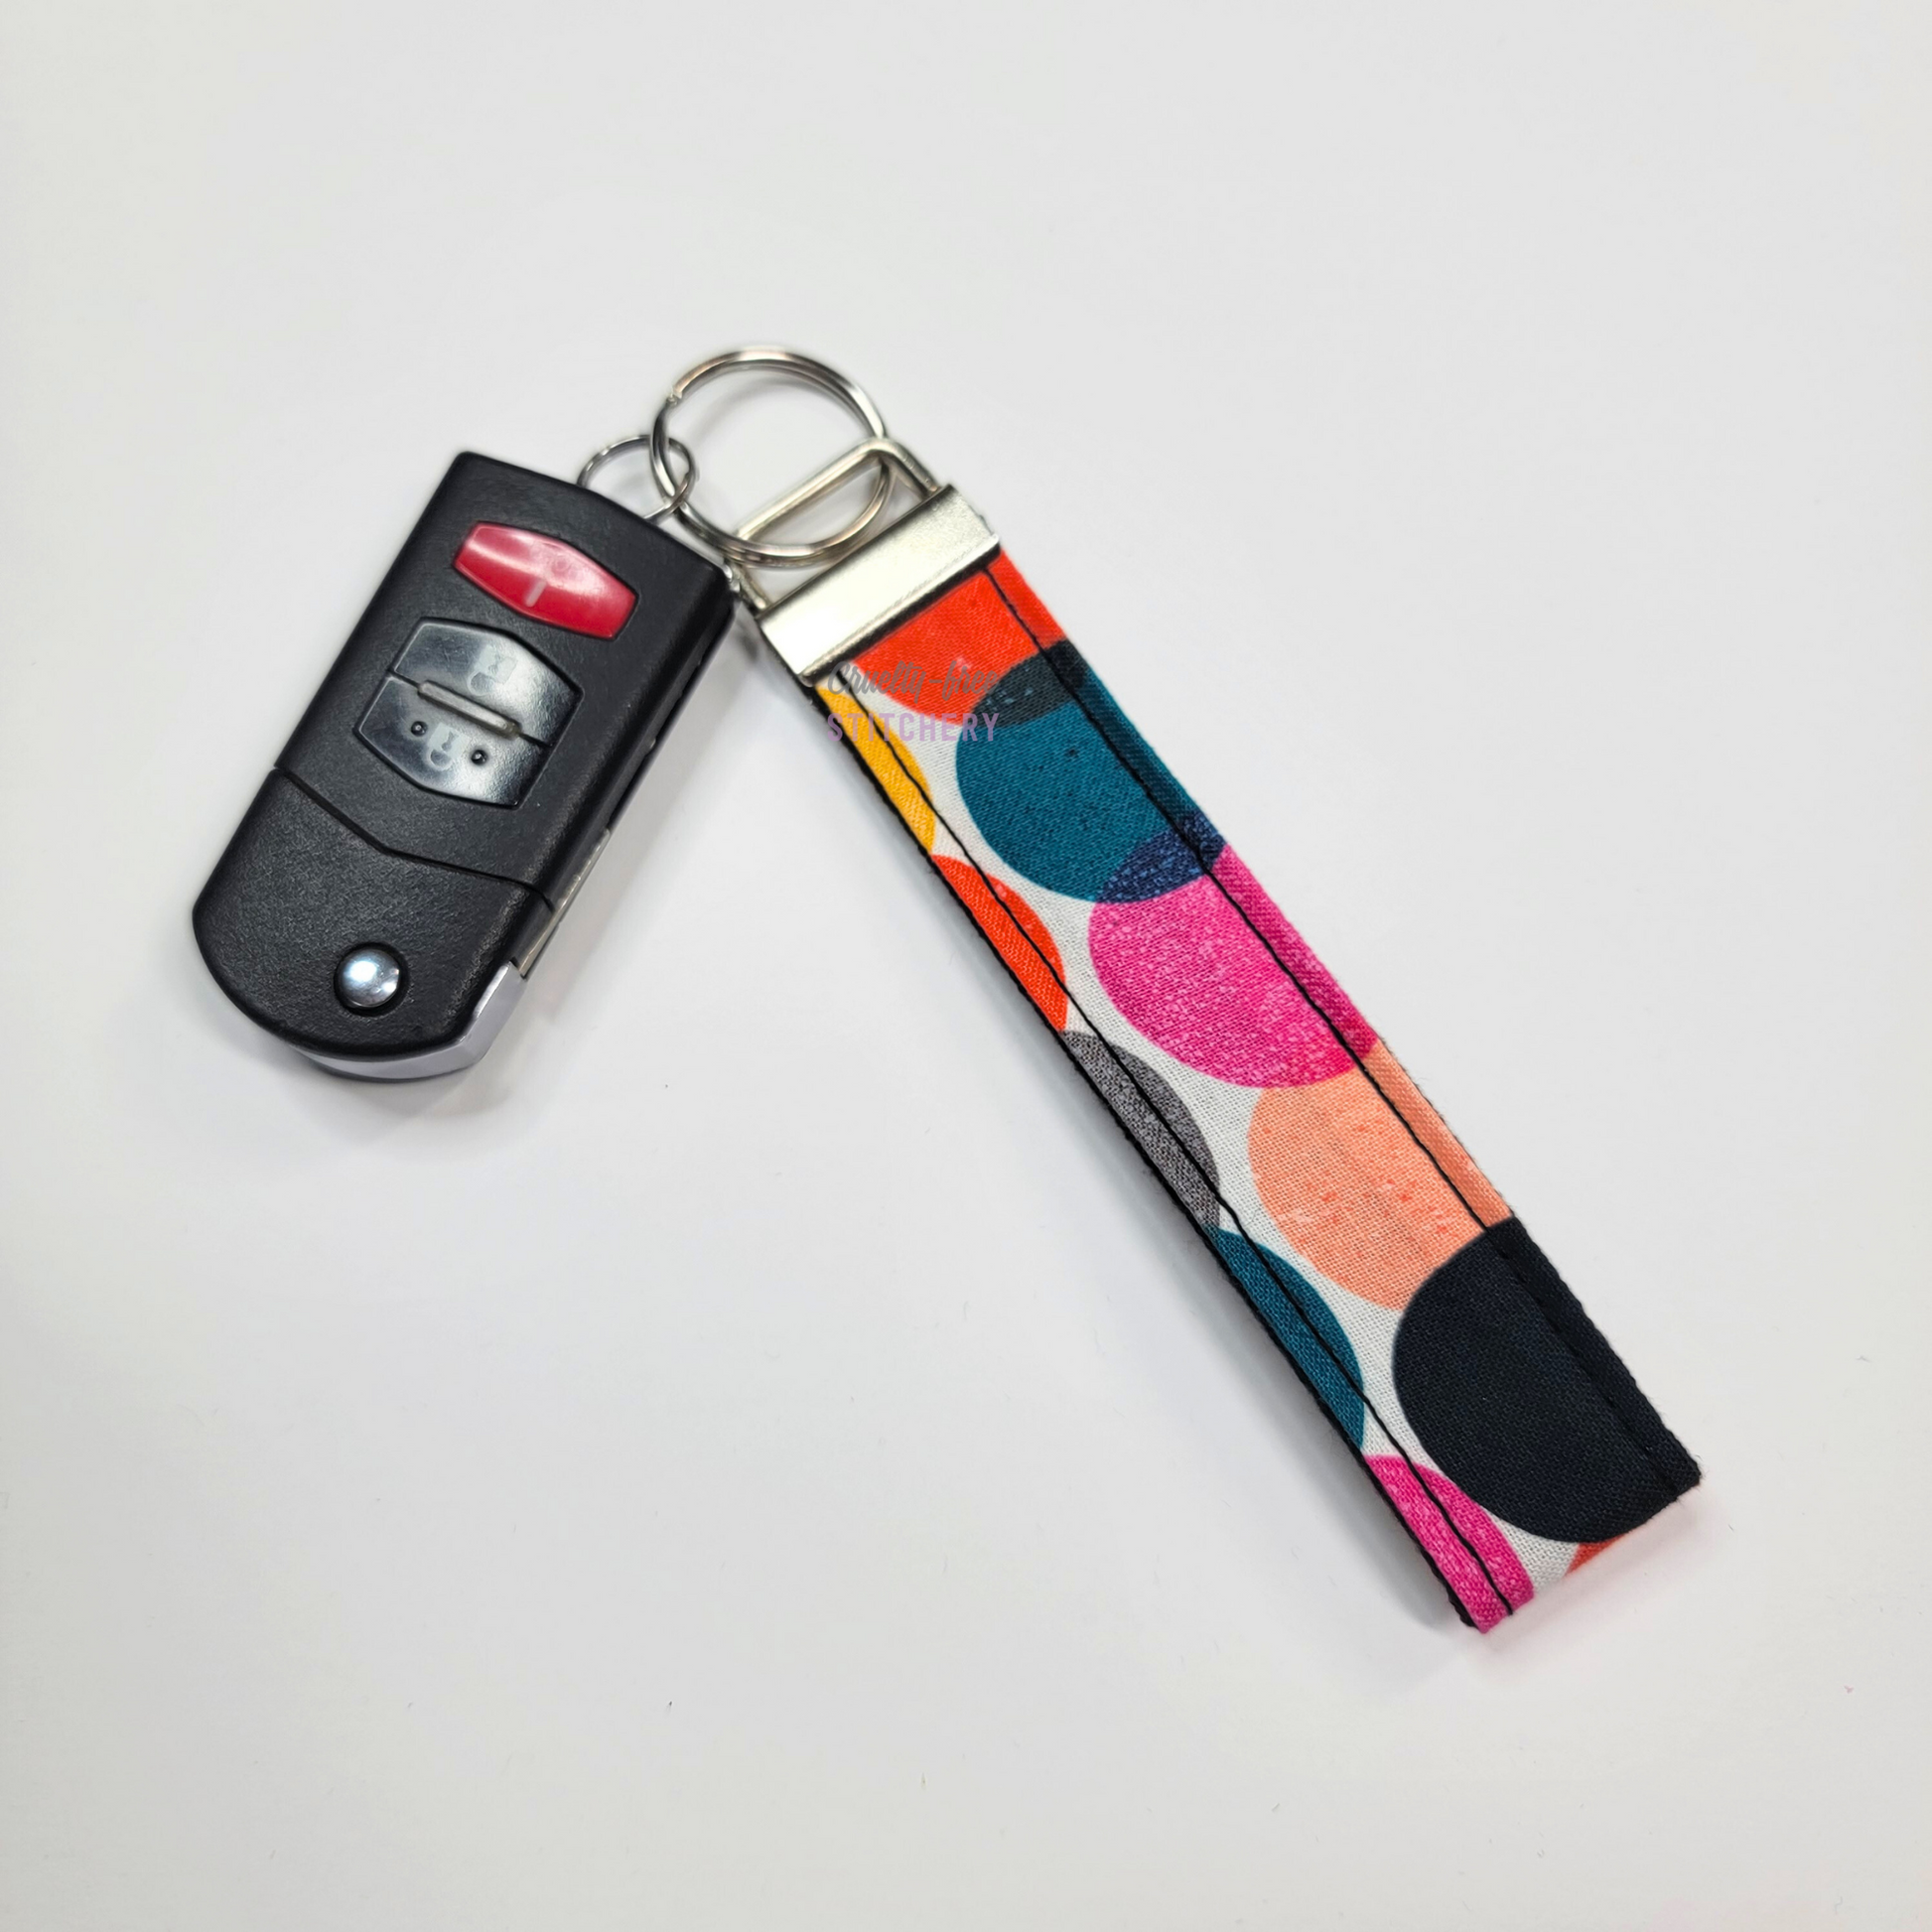 Retro dots print key fob wristlet attached to a car key for scale. The car key is the fold-away type and is about half as long as the strap.